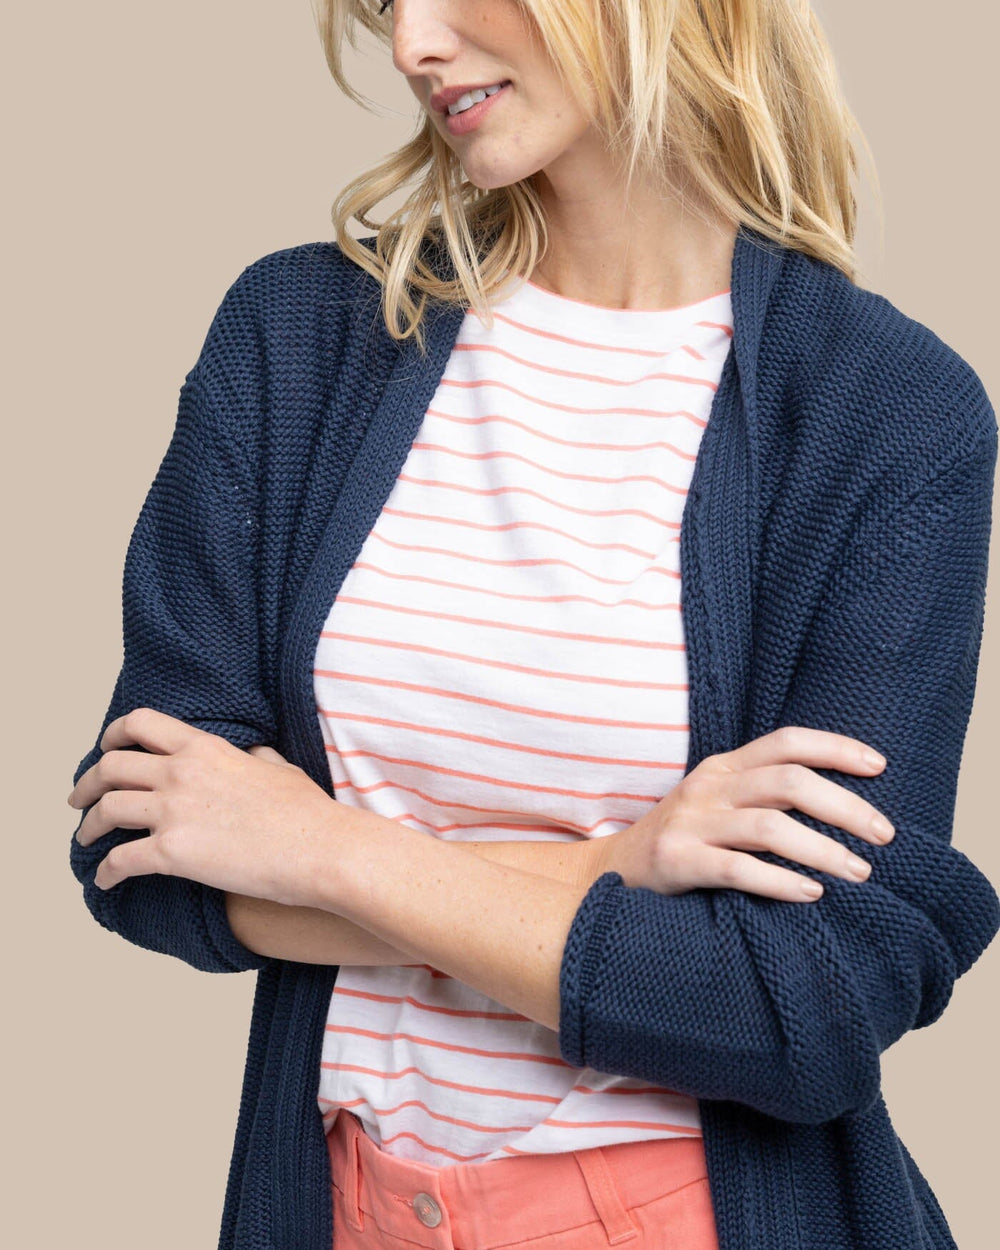 The detail view of the Southern Tide Marren Cardigan by Southern Tide - Dress Blue